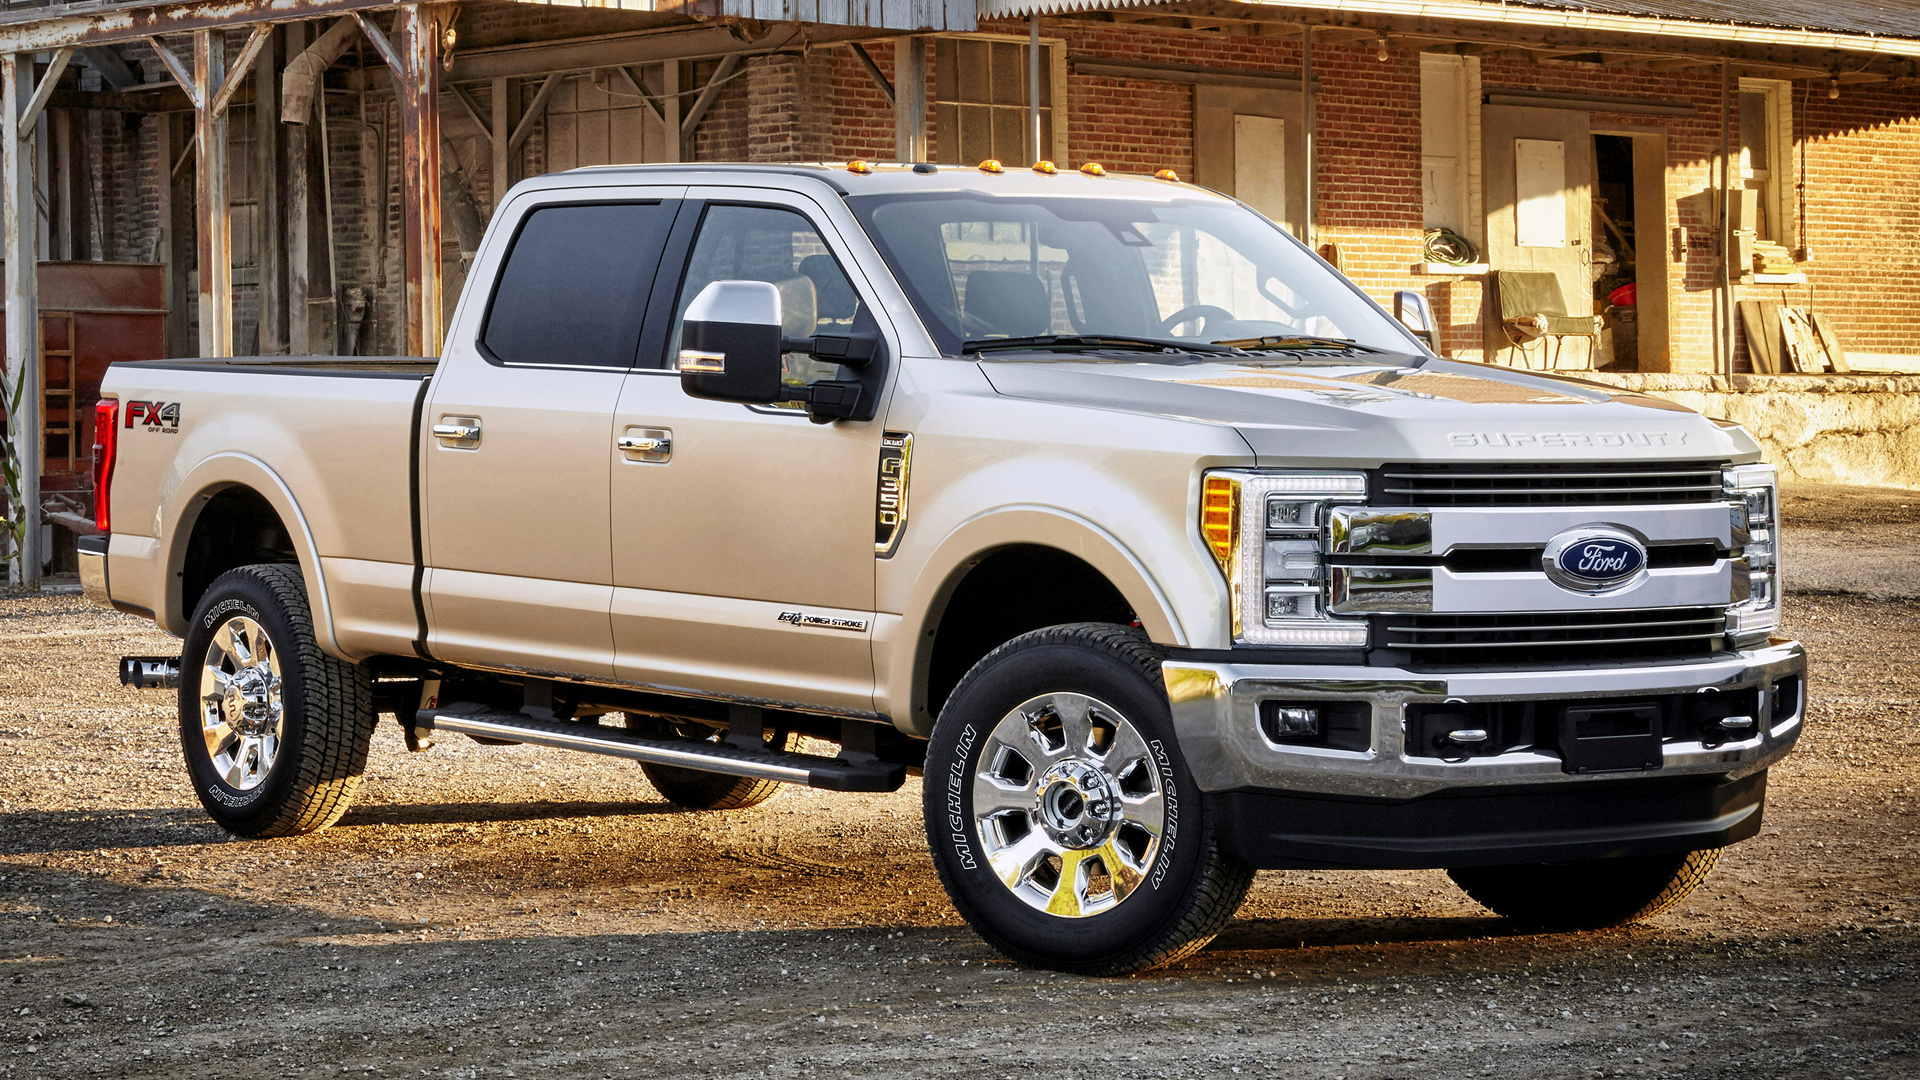 2015 Ford F-Series Super Duty Wallpapers